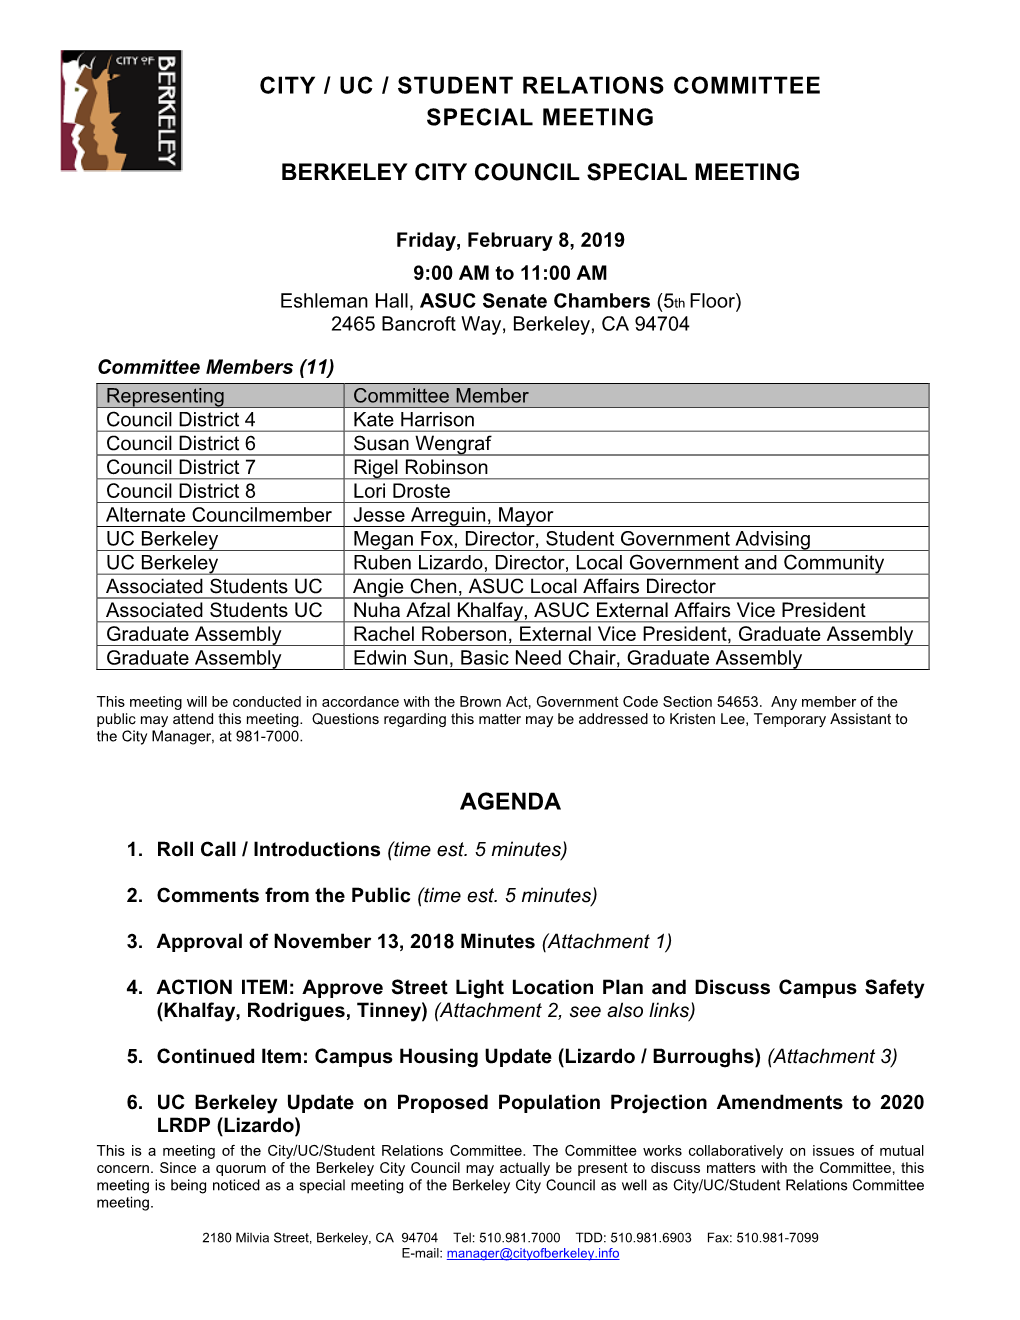 City / Uc / Student Relations Committee Special Meeting